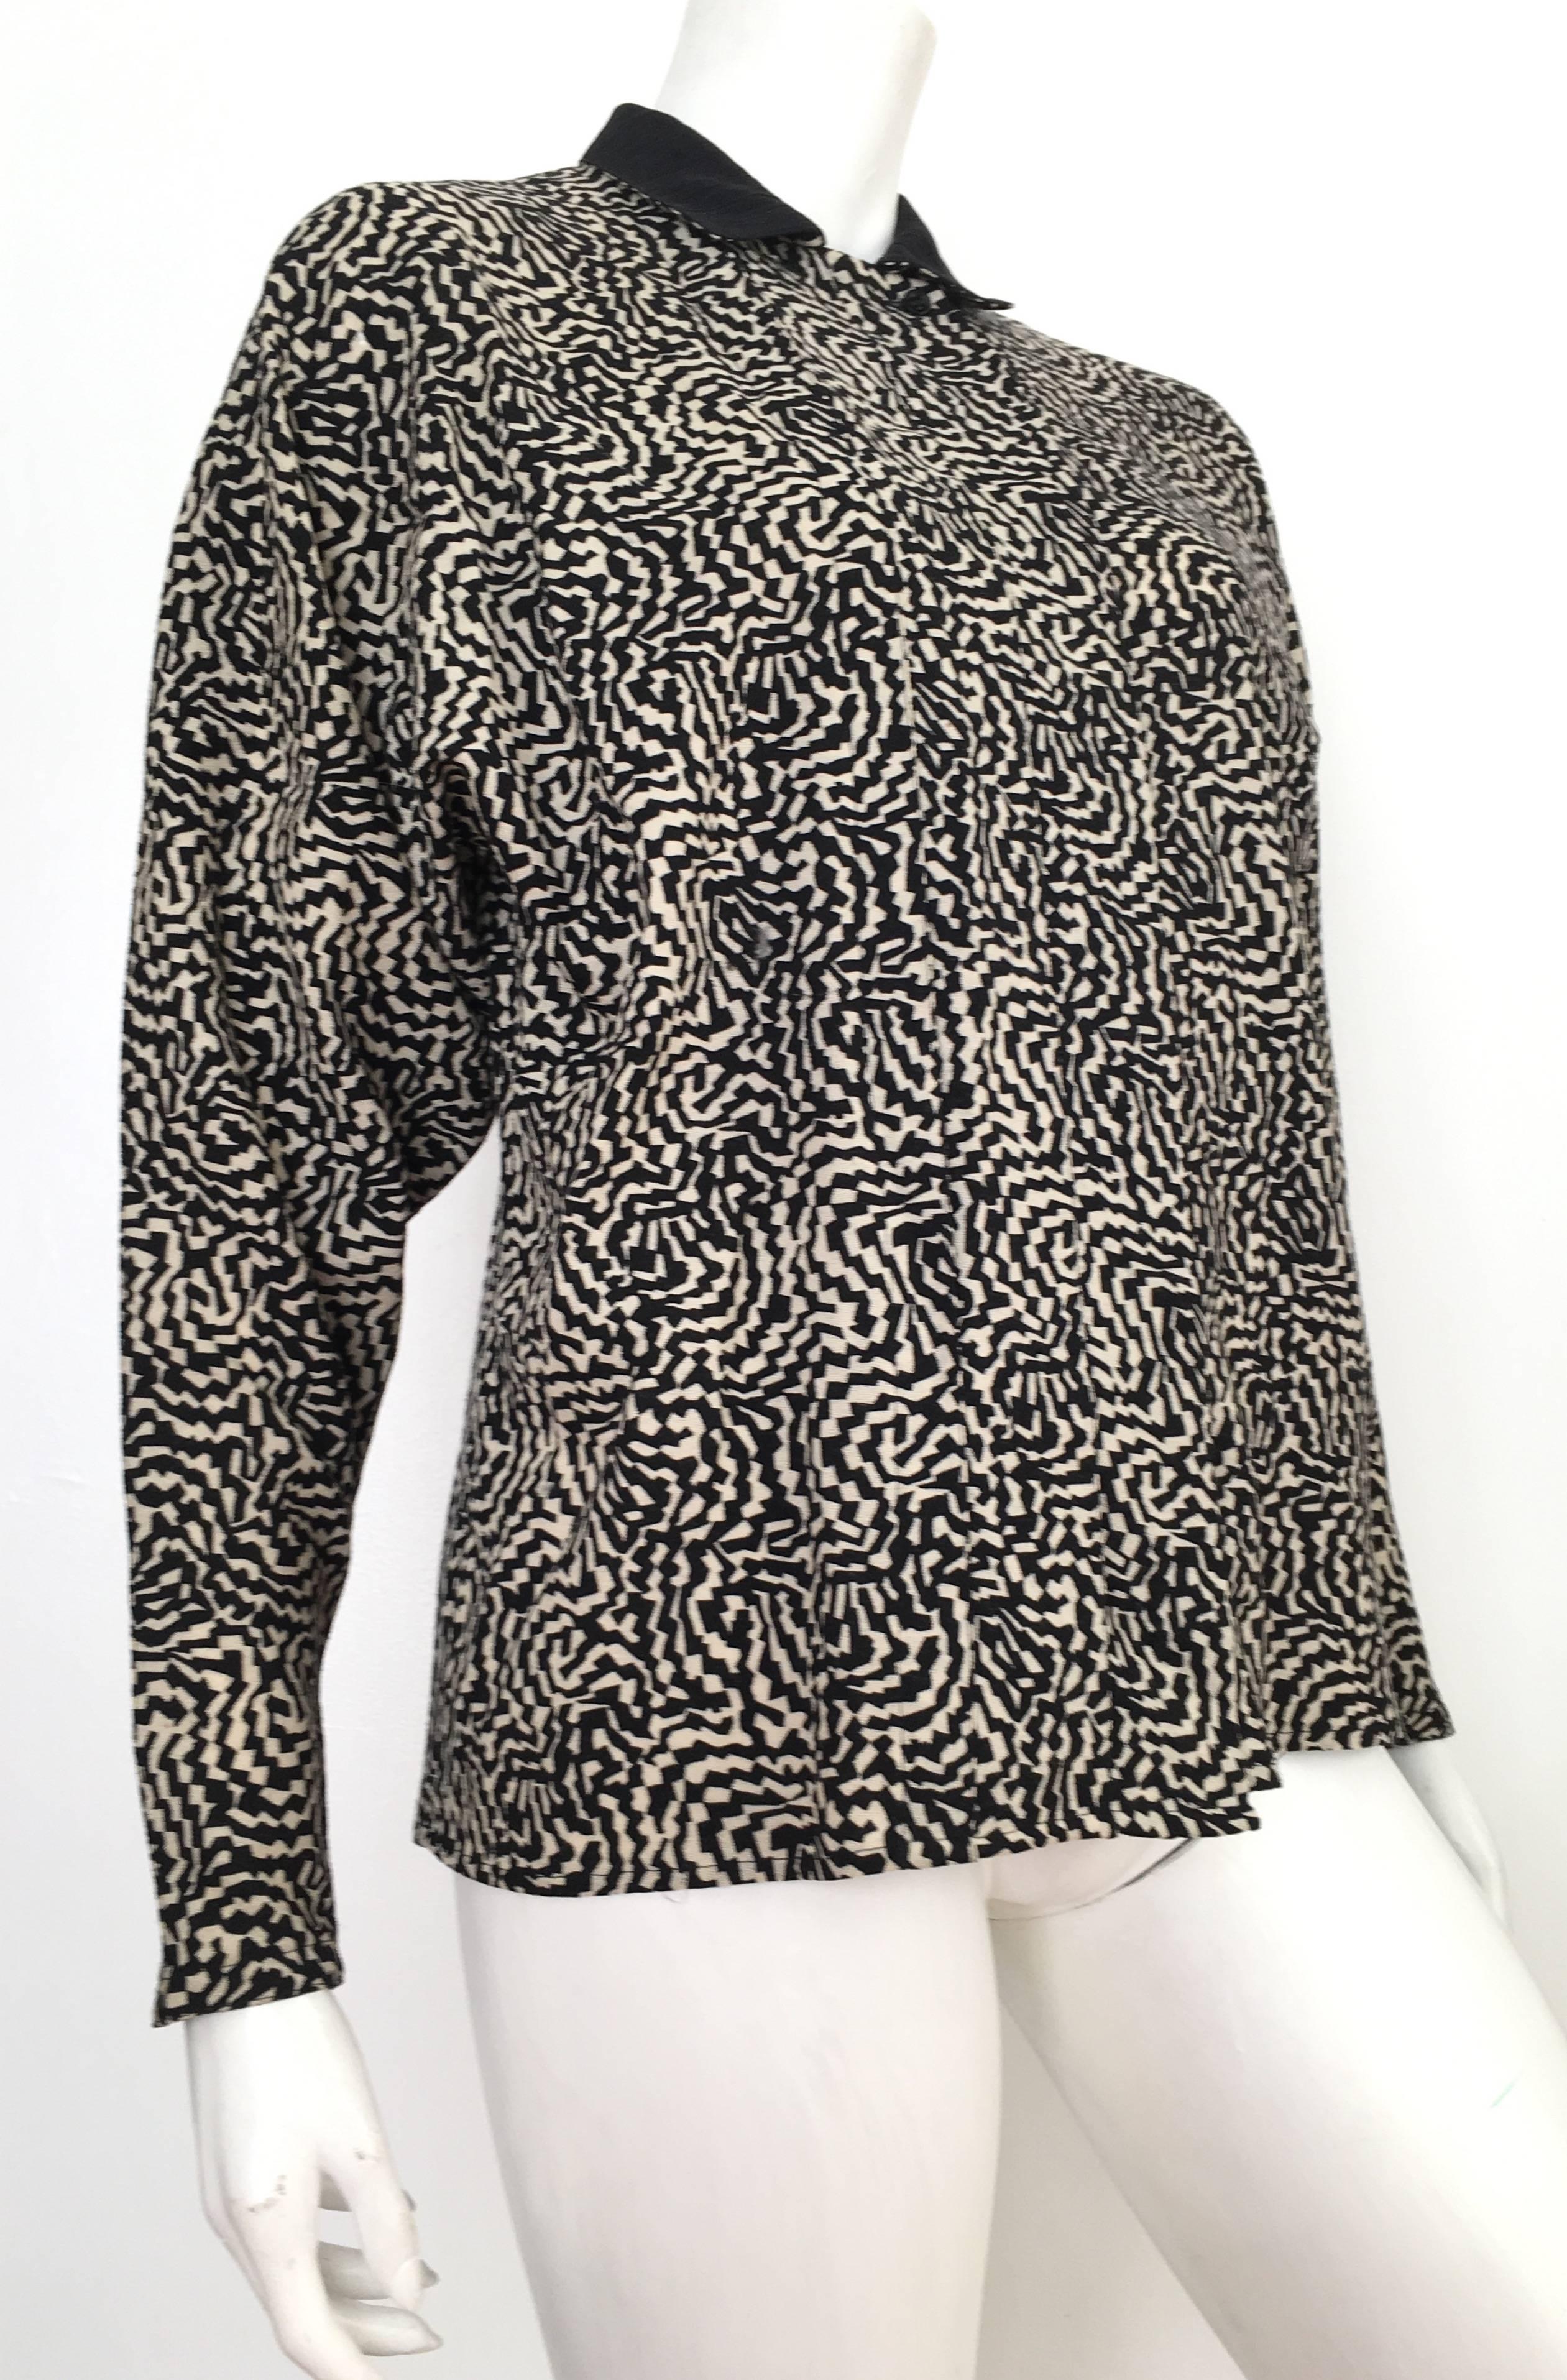 Gianni Versace 1980s wool gorgeous abstract pattern button up blouse with dolman zipper sleeves is a size 6.  Ladies please grab your trusted friend, Mr. Tape Measure, so you can properly measure your bust & arm length to make certain this vintage